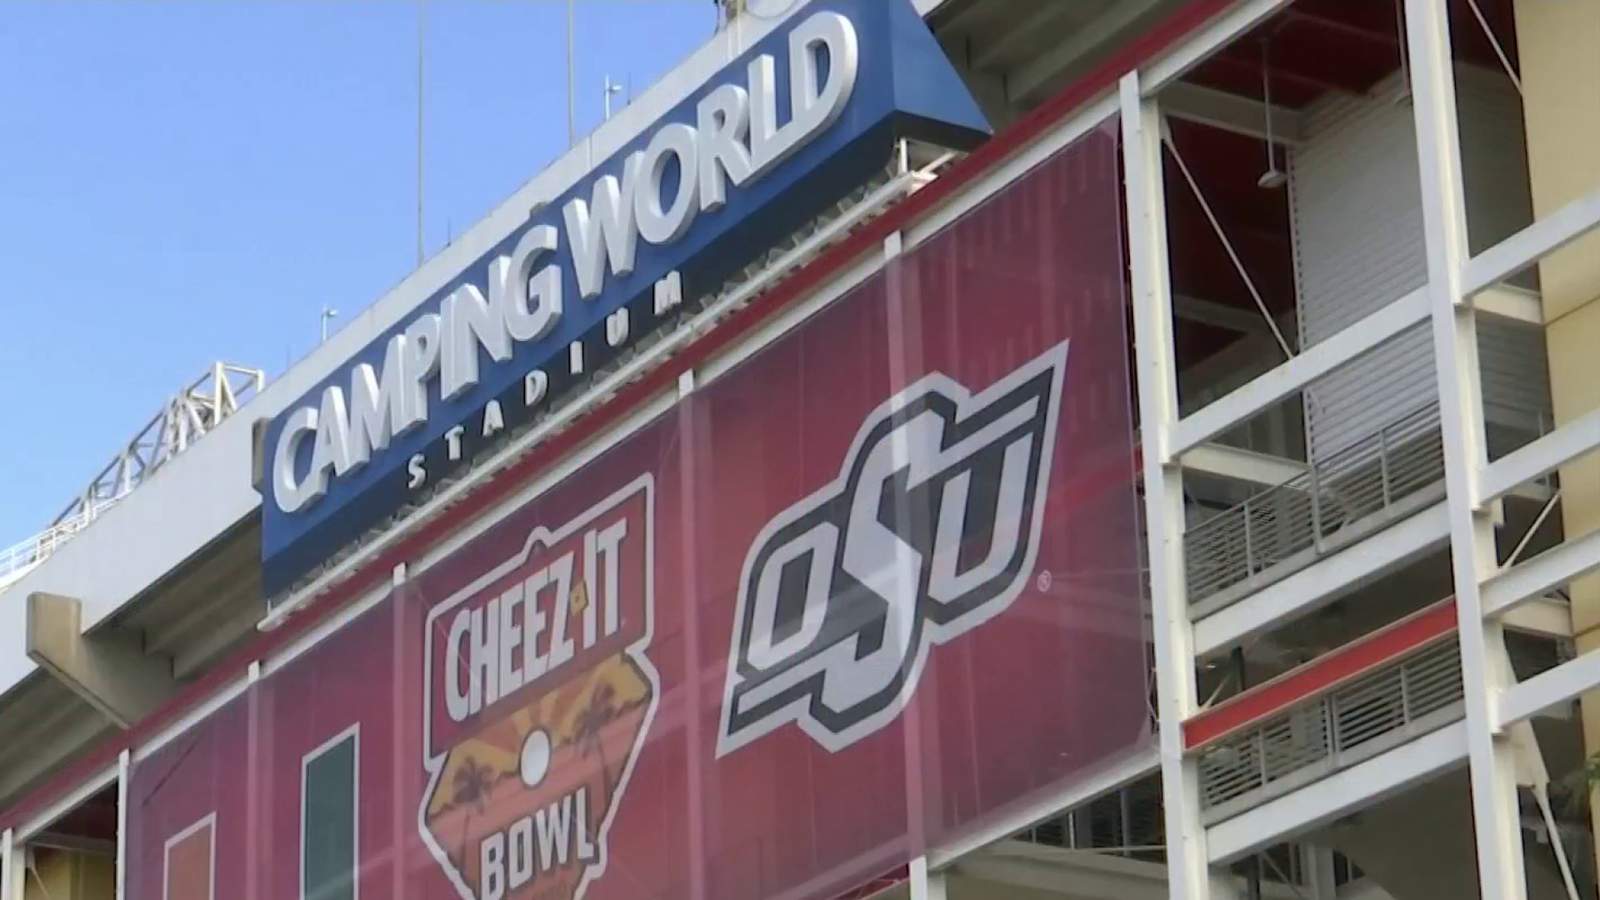 Camping World Stadium hosts Cheez-It Bowl and thousands of fans